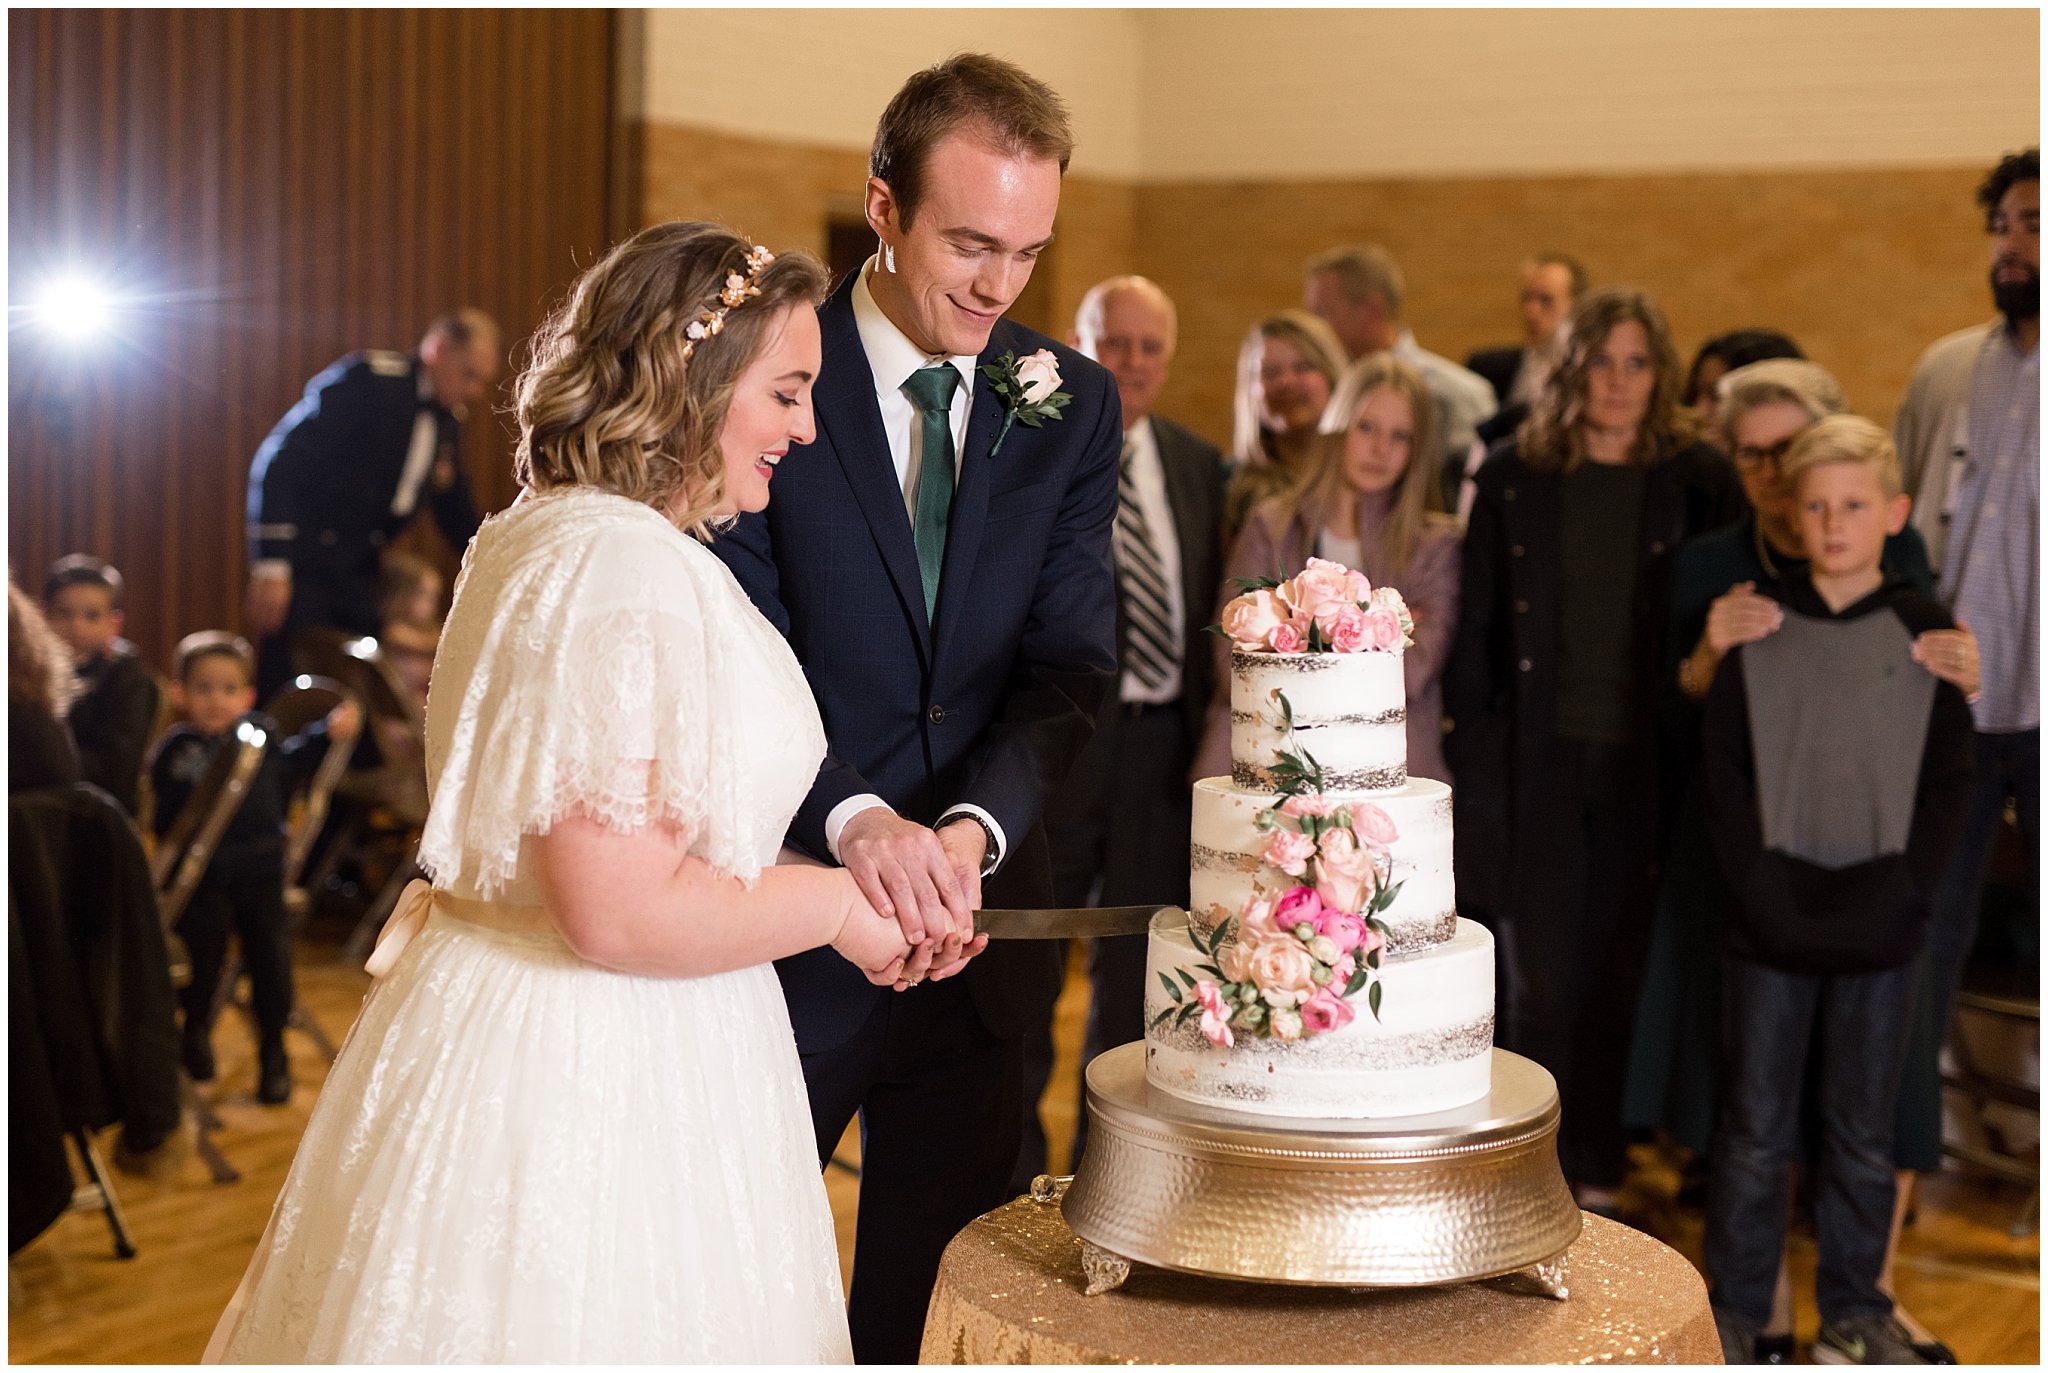 Bride and groom cutting wedding cake | Ogden Temple Winter Wedding | Emerald Green and Pink Wedding | Jessie and Dallin Photography